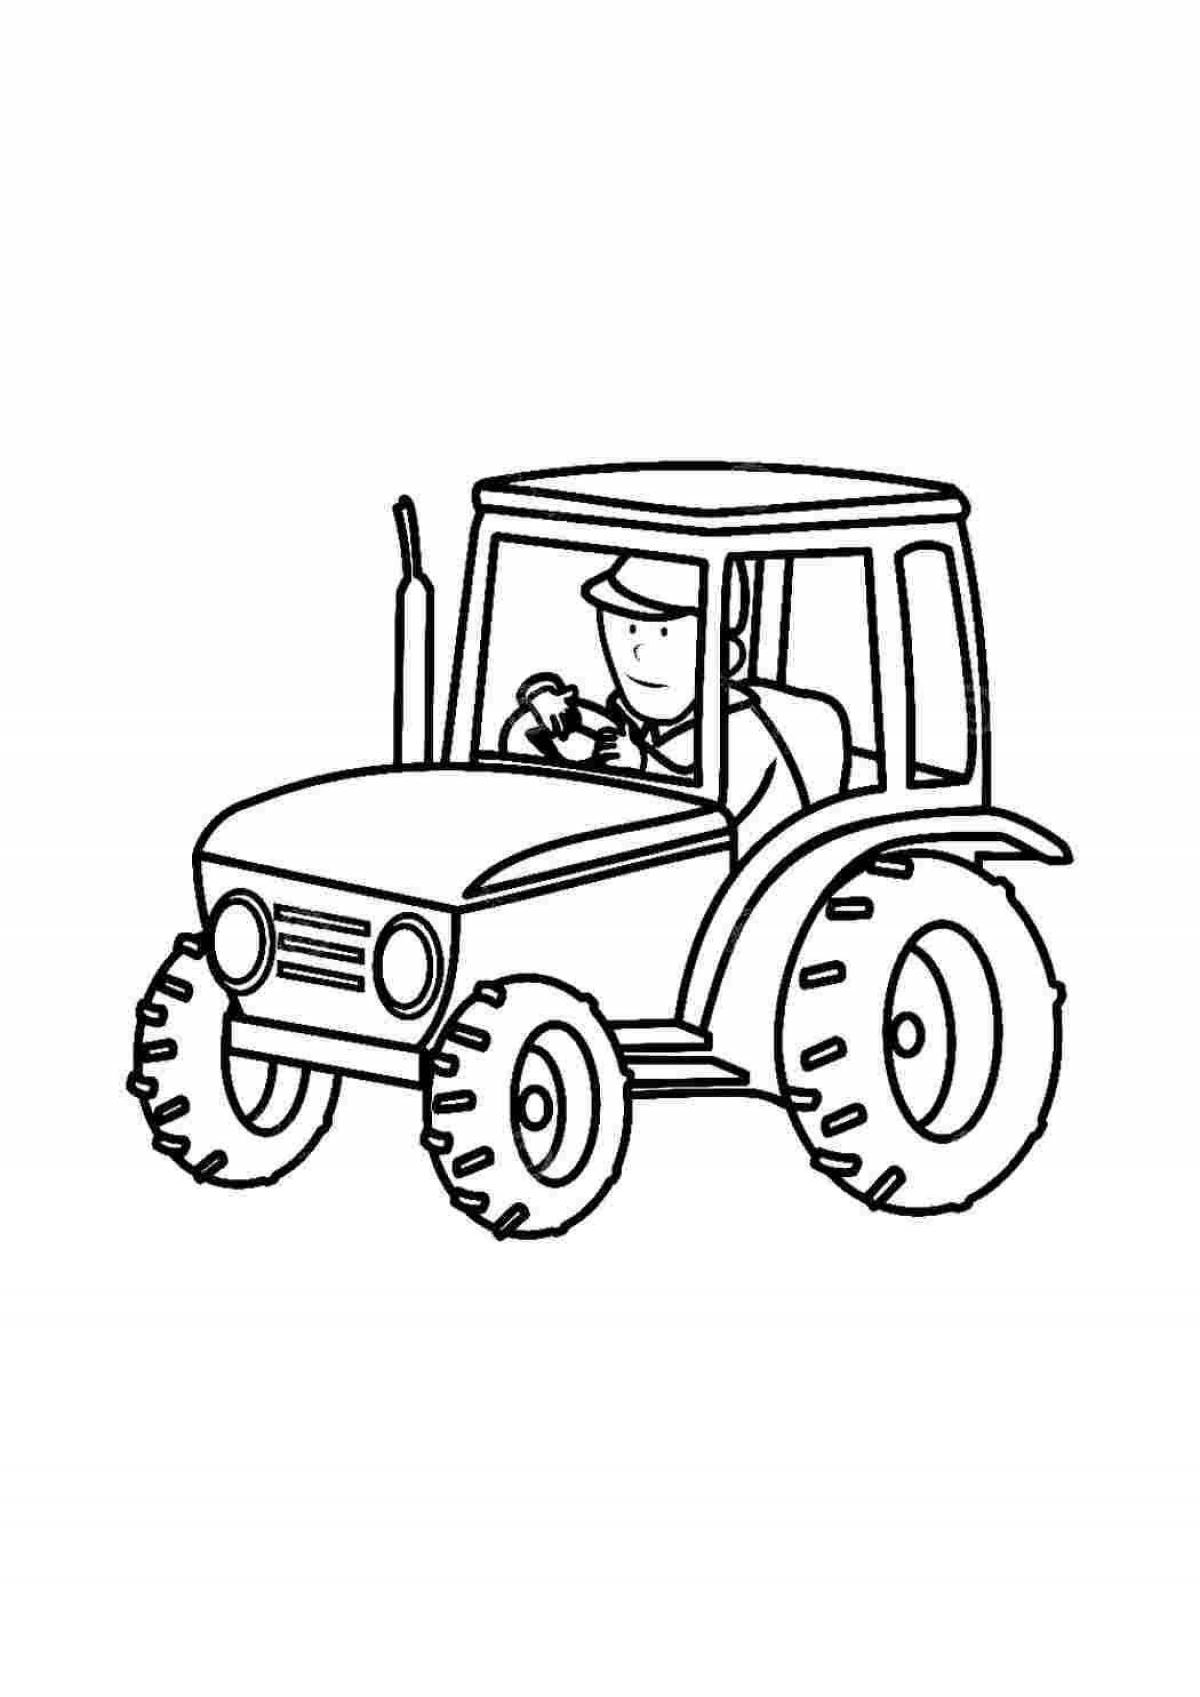 Grand left truck tractor coloring page